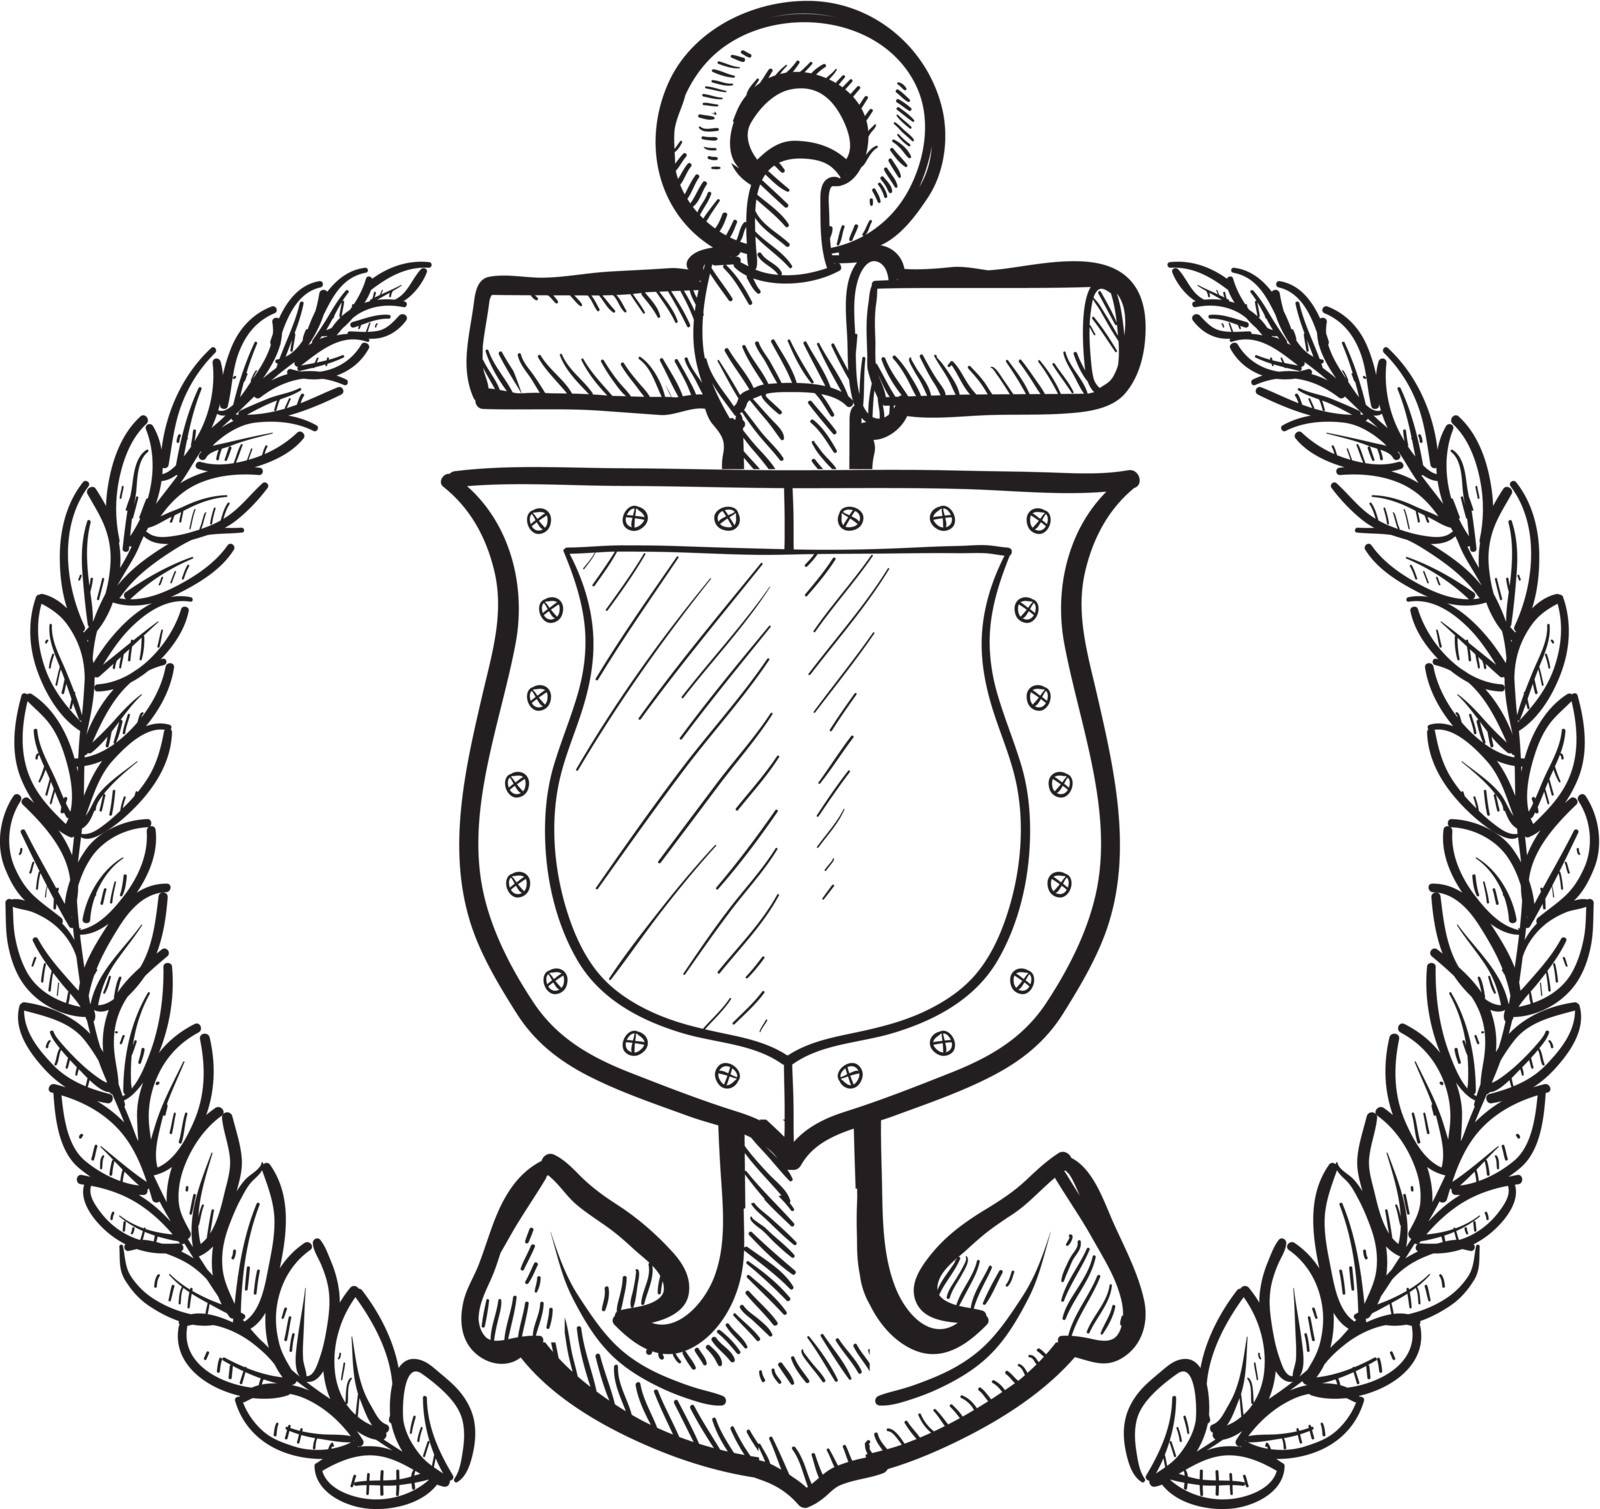 Maritime insignia shield in vector format by lhfgraphics